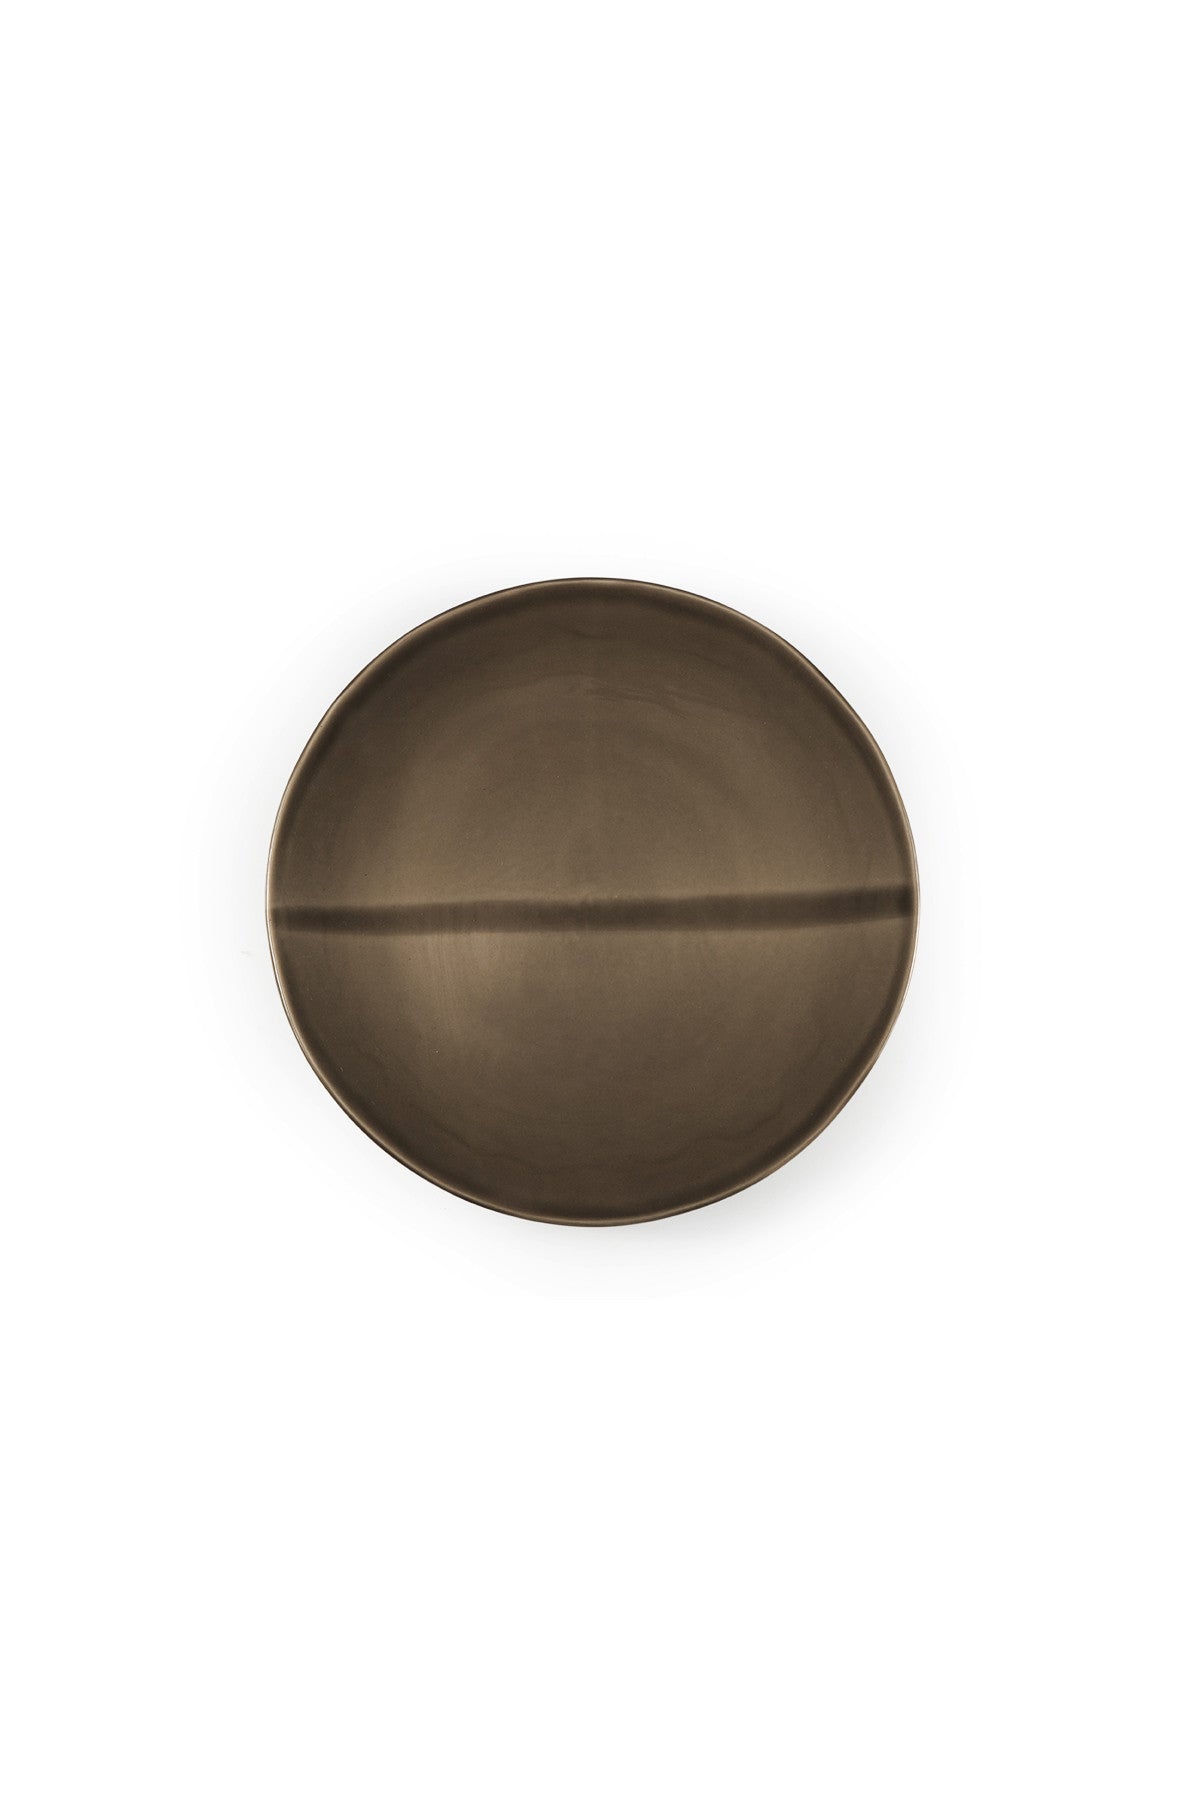 PLATE 28cm SMOOTH, OLIVE